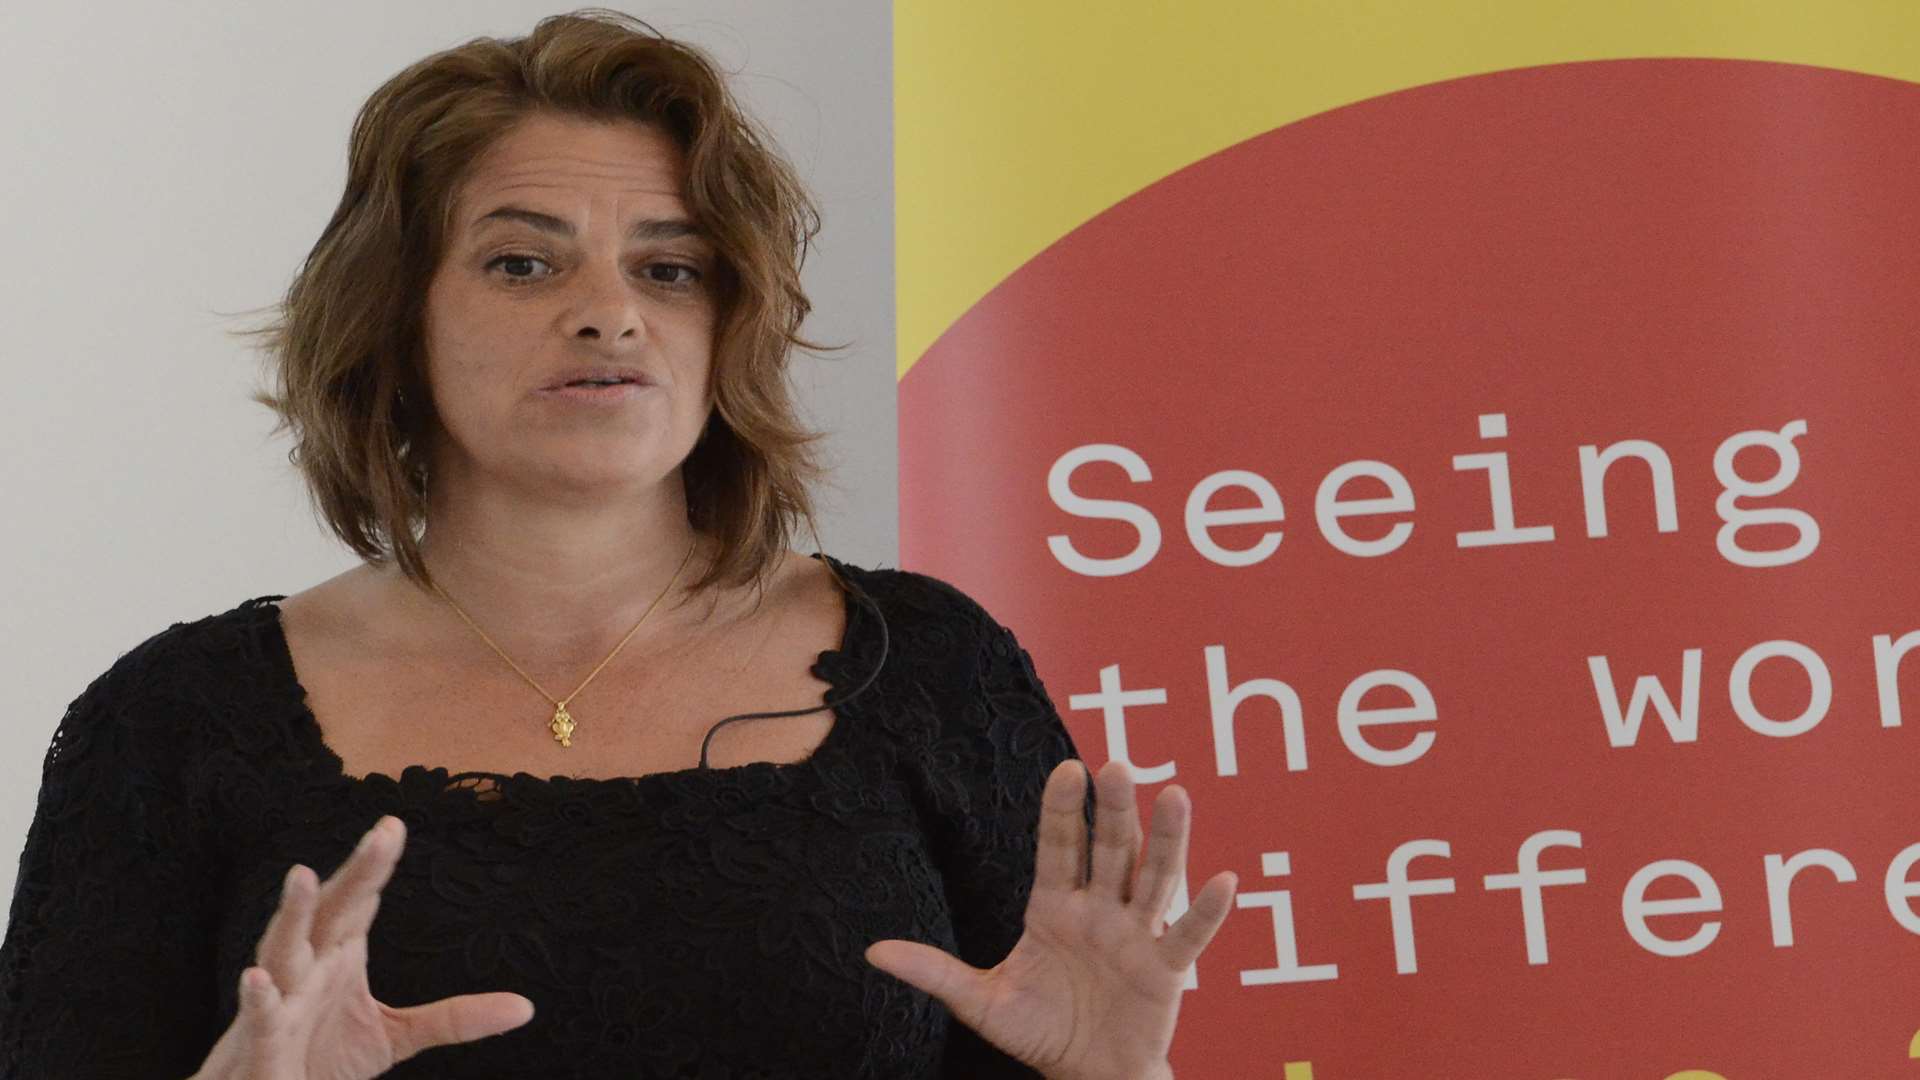 Tracey Emin speaking at Turner Contemporary